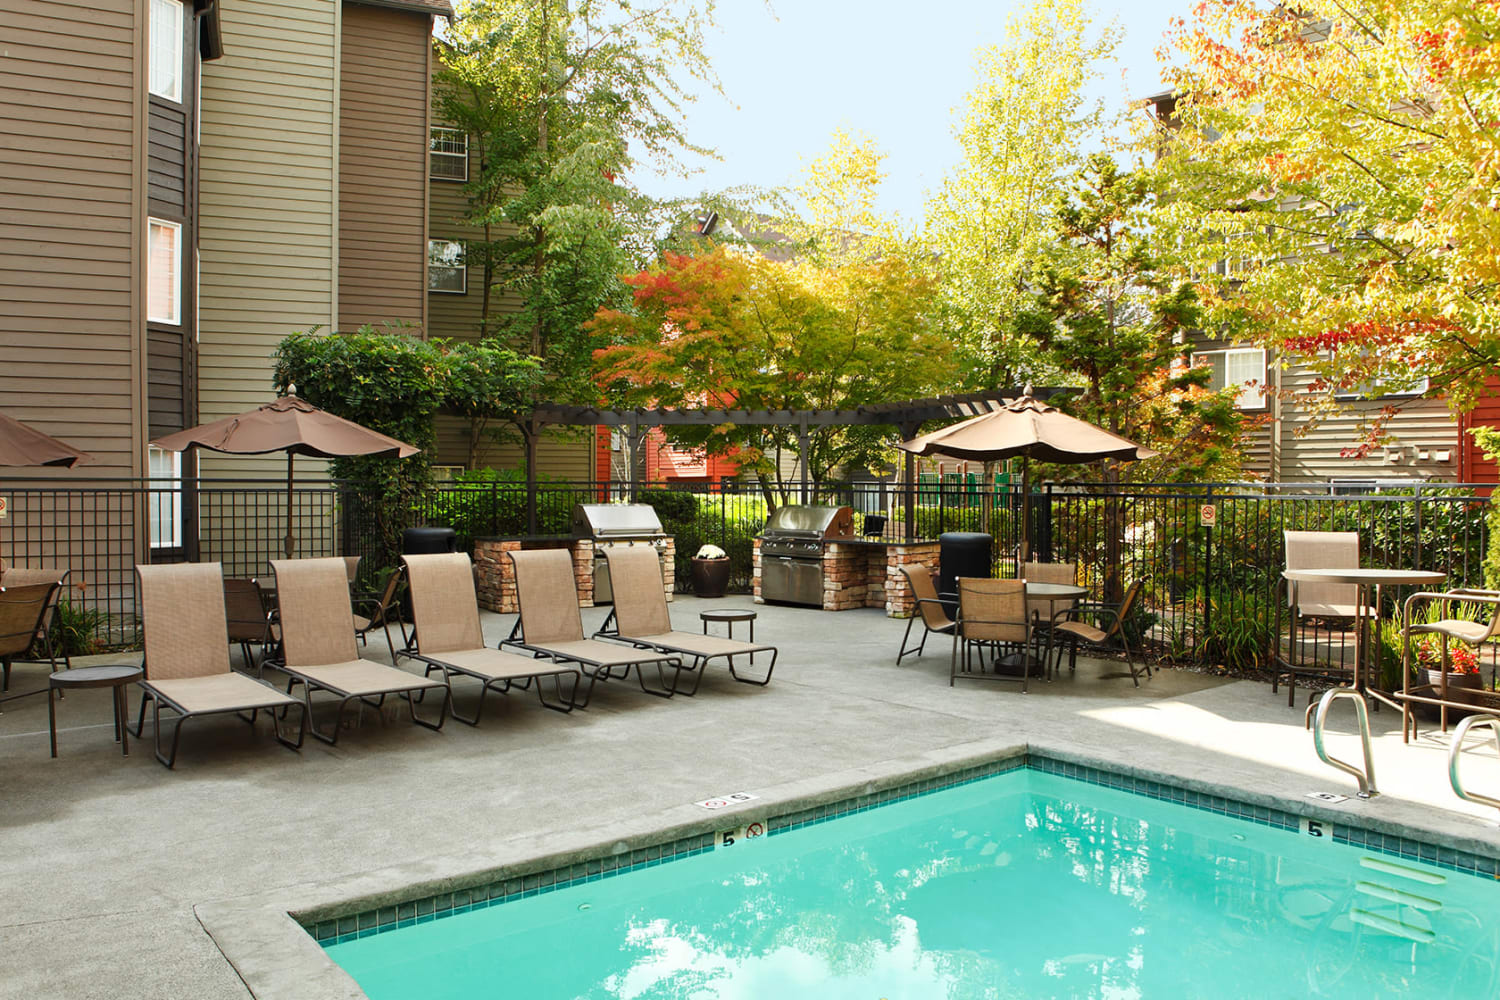 Dazzling blue pool with nearby seating at Redmond Place Apartments in Redmond, Washington